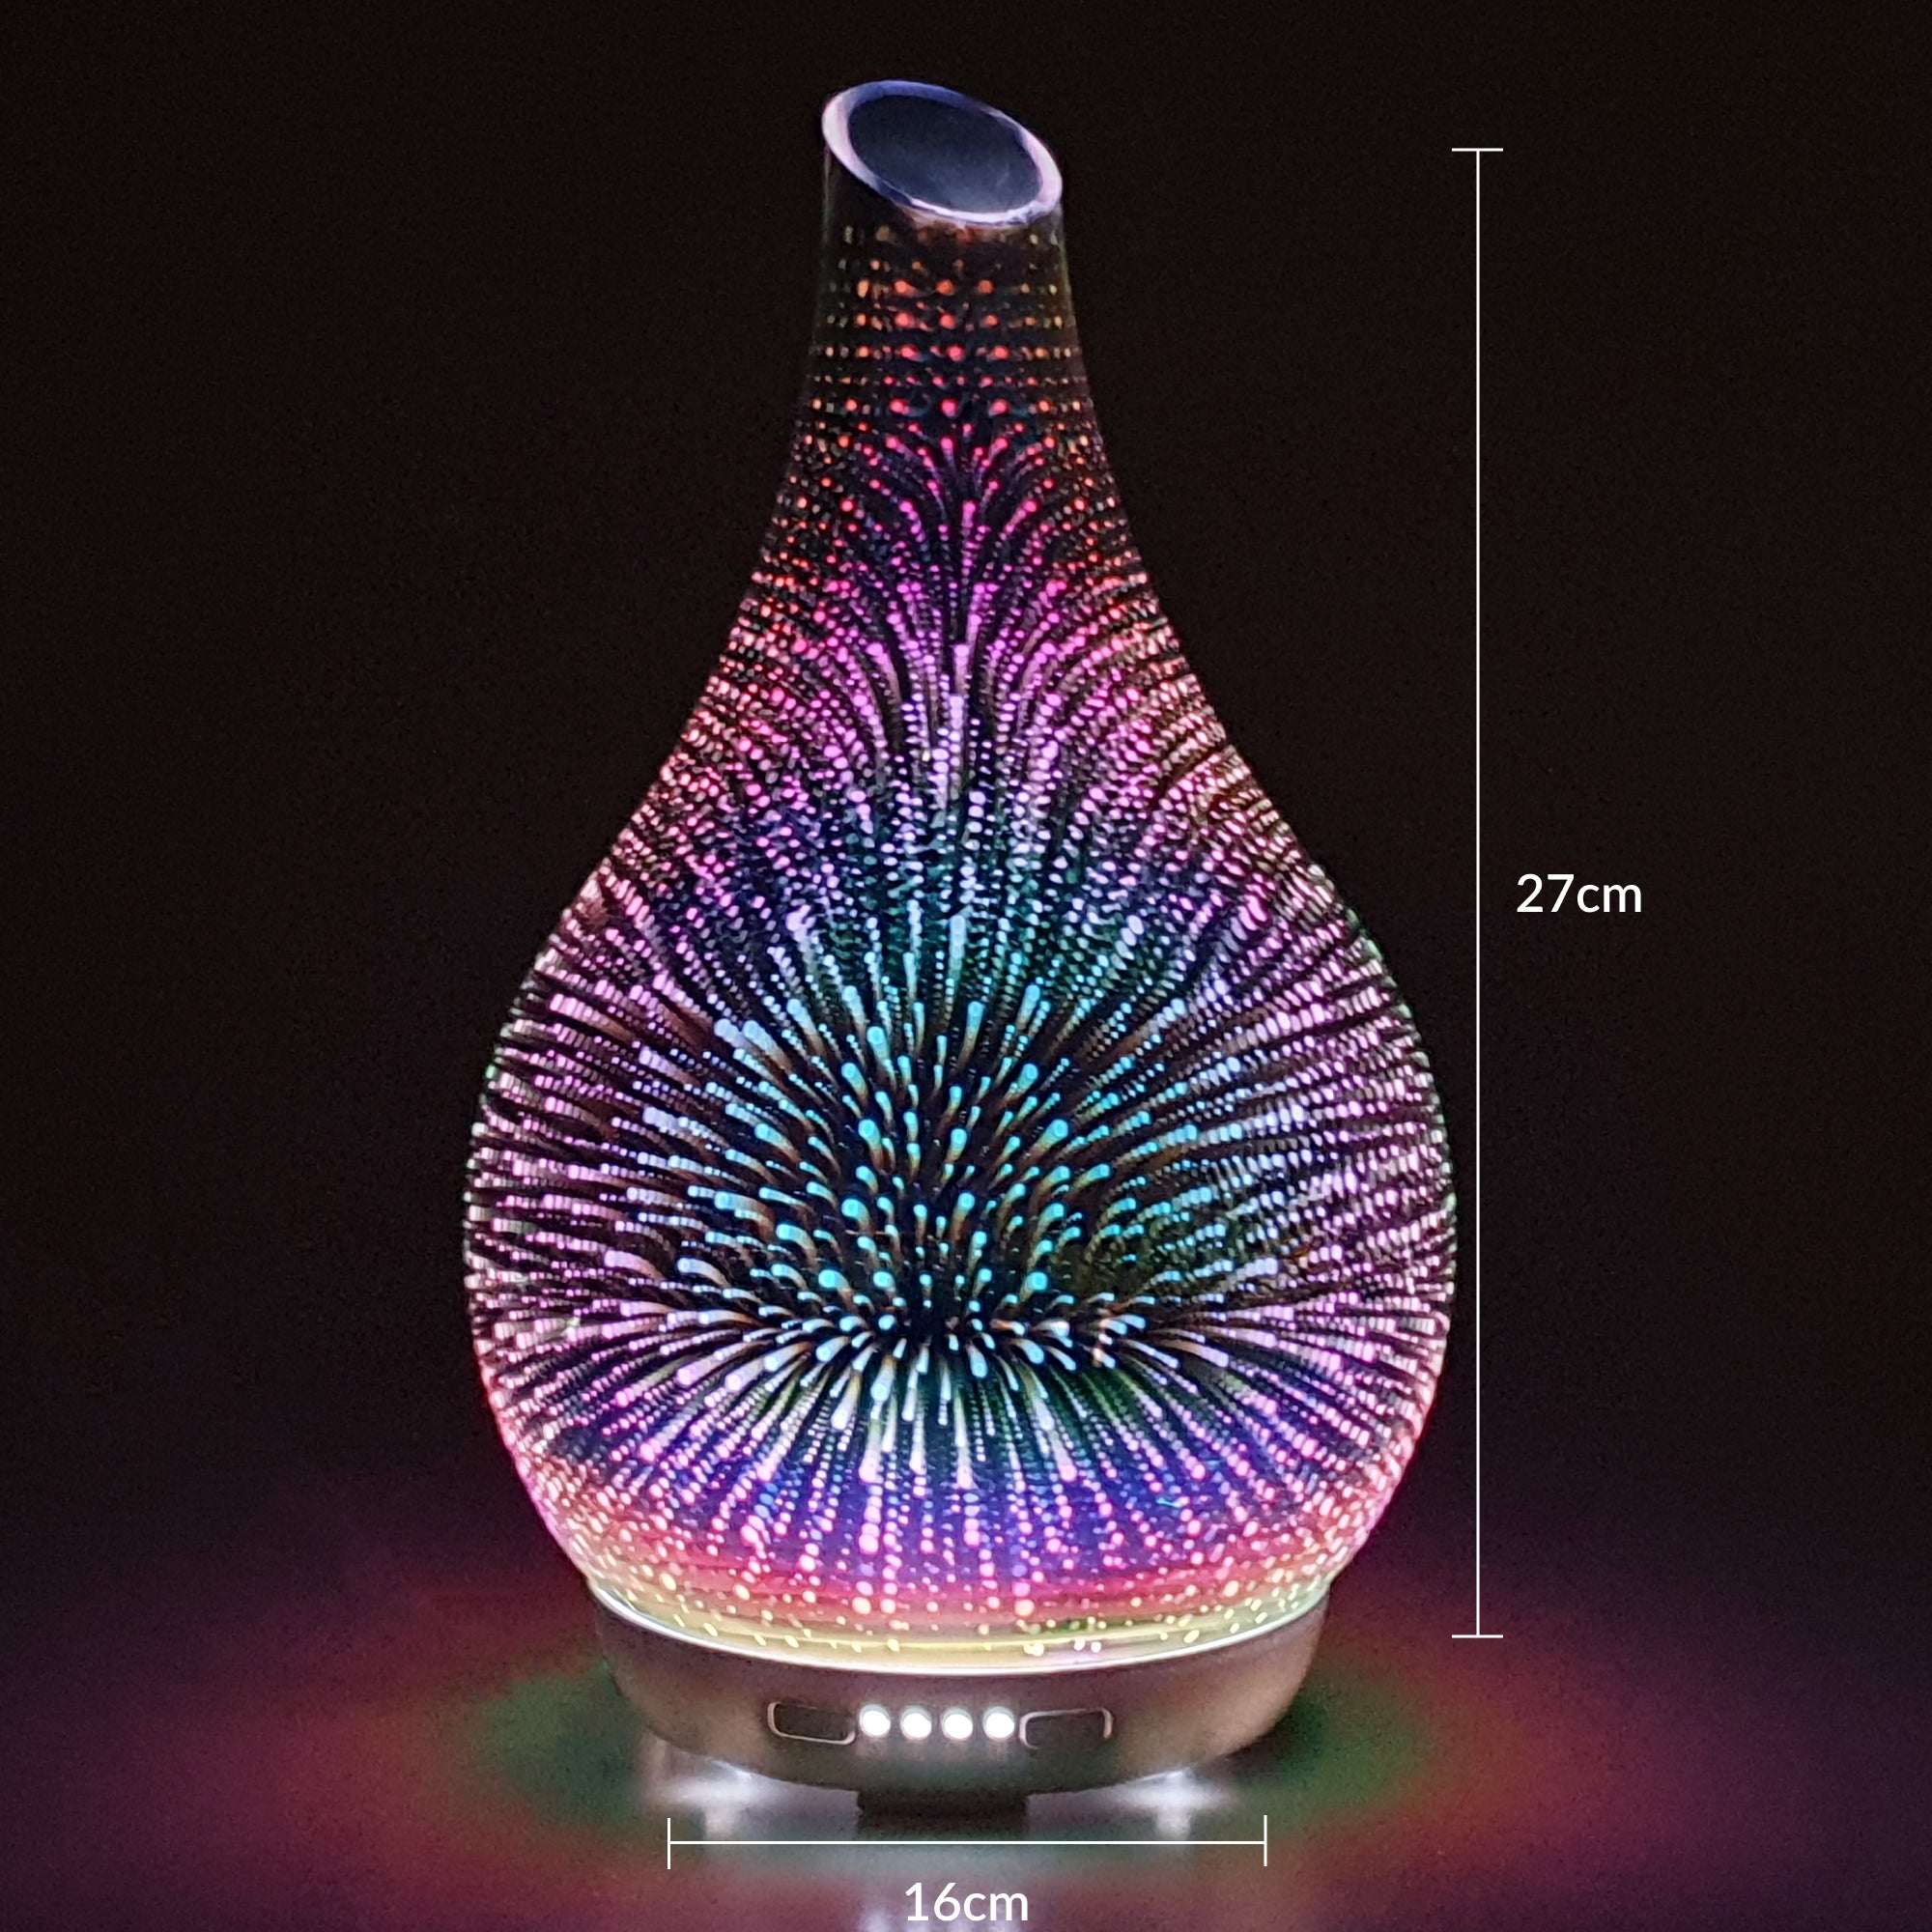 Cello - 3D Ultrasonic Diffuser Large - Infinity